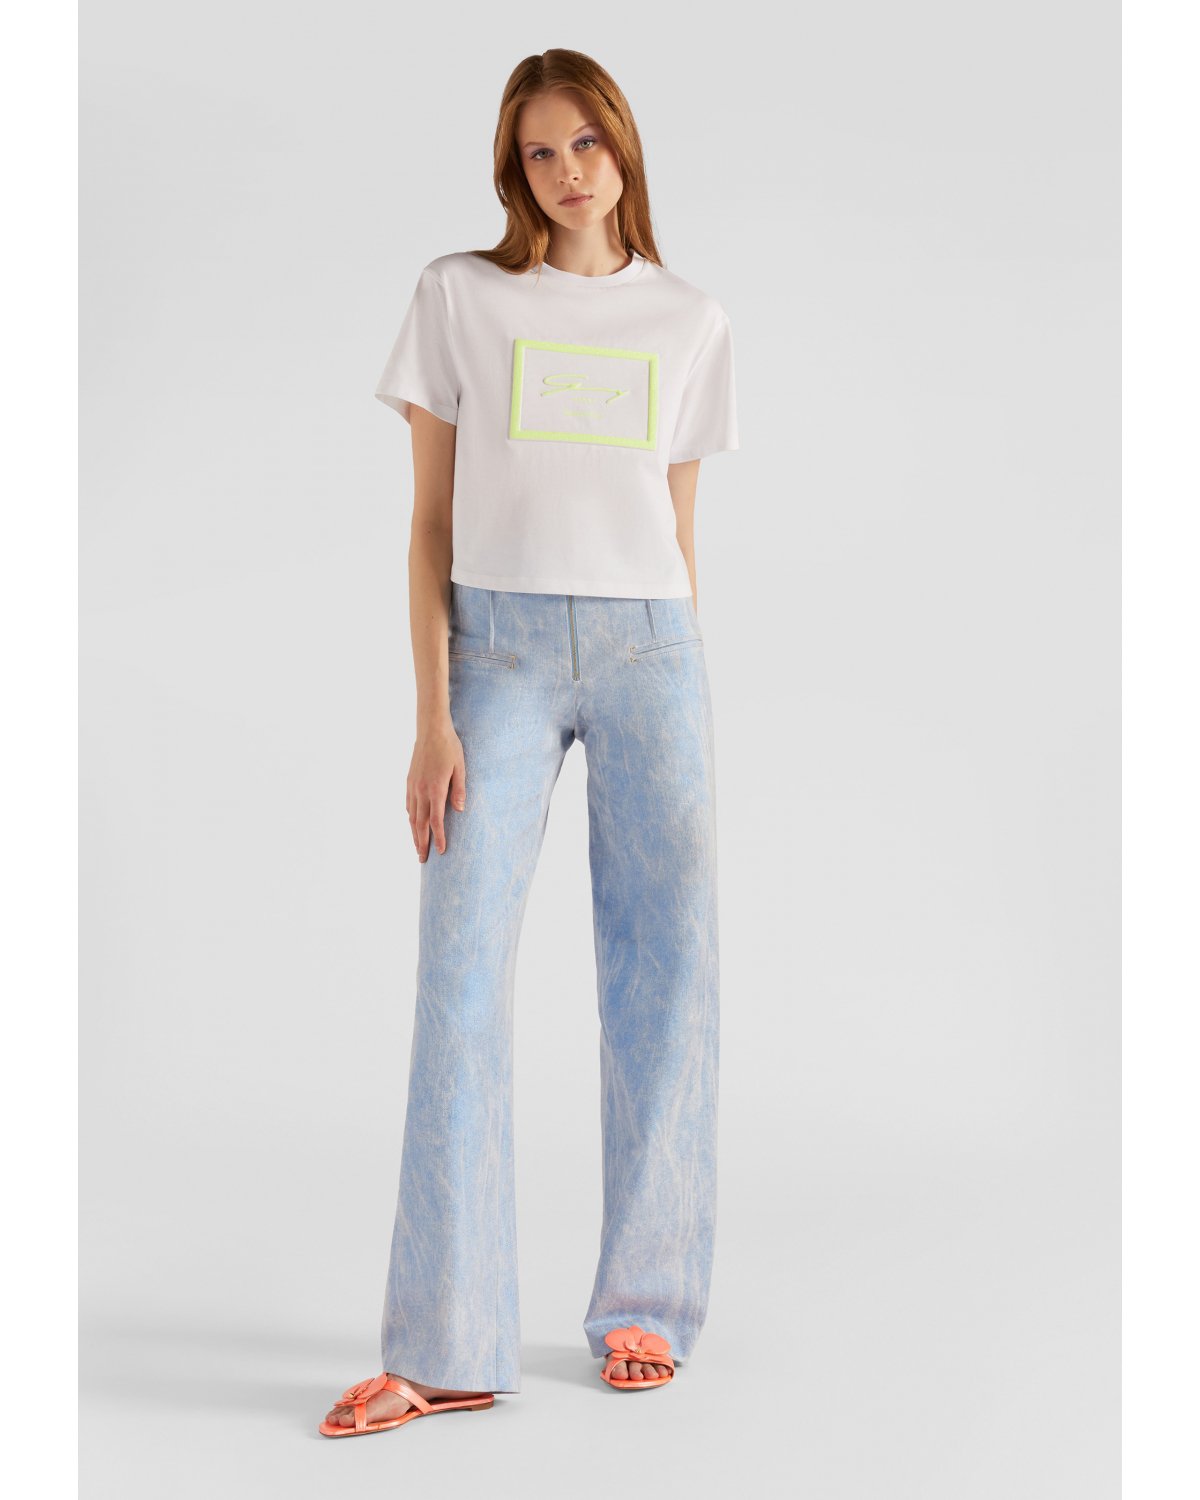 Cropped t-shirt with a logo print | Spring Summer 2023 Collection Show, Ready to Wear, Spring Summer 2023 Collection | Genny